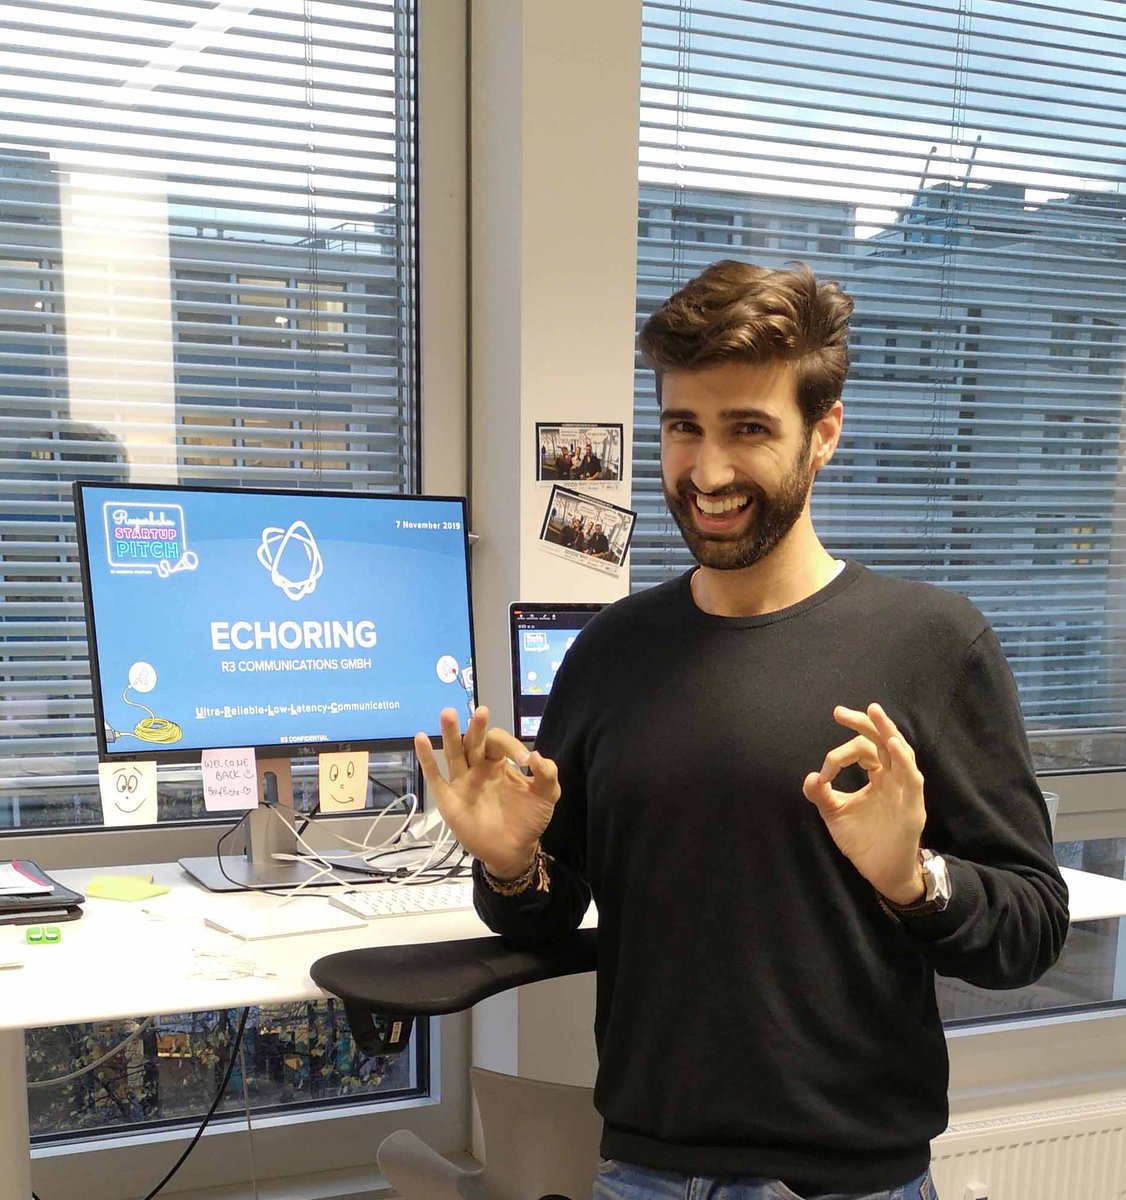 Look how excited @BushXavier is about pitching at the Reeperbahn pitch - At least as much as we are! In 2 days it will be ready. Feel free to reach out to him for a meeting. #echoring #bebold #startup #aerospace #wirelesswarriors #jointherevolution #r3 #Berlin #hamburg